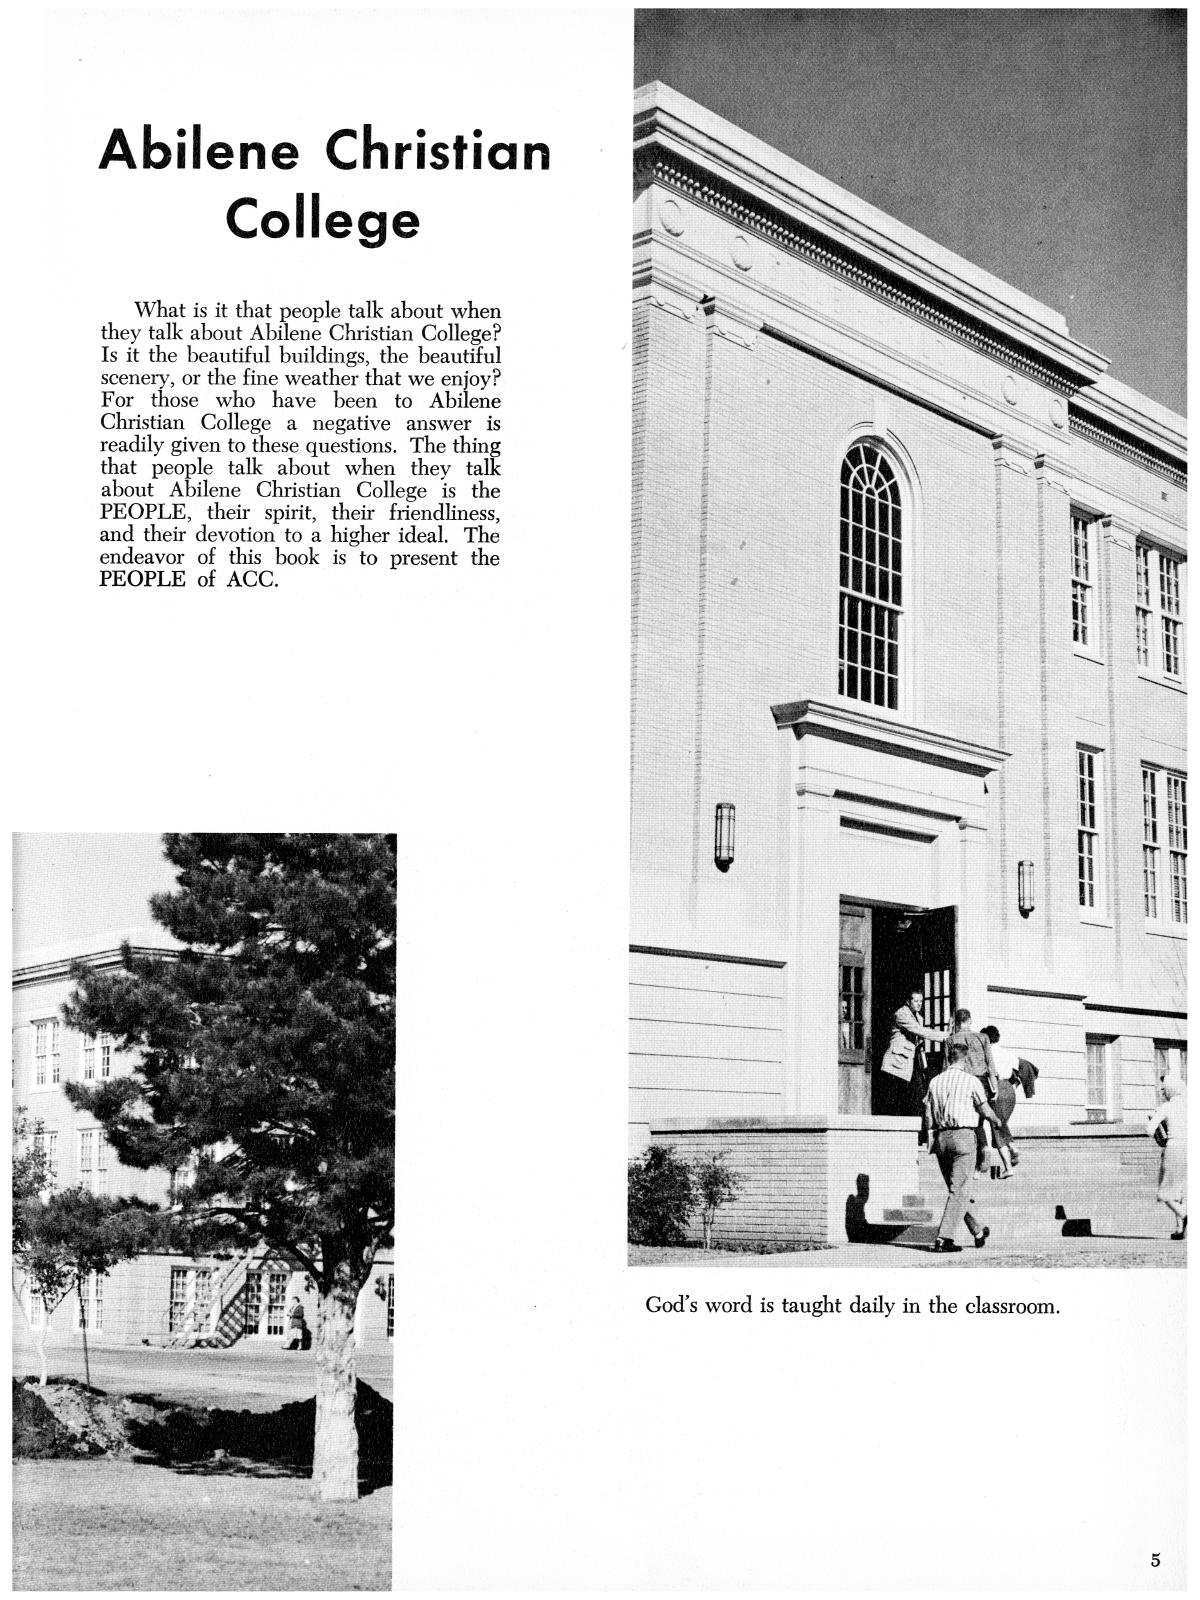 Prickly Pear, Yearbook of Abilene Christian College, 1960
                                                
                                                    5
                                                